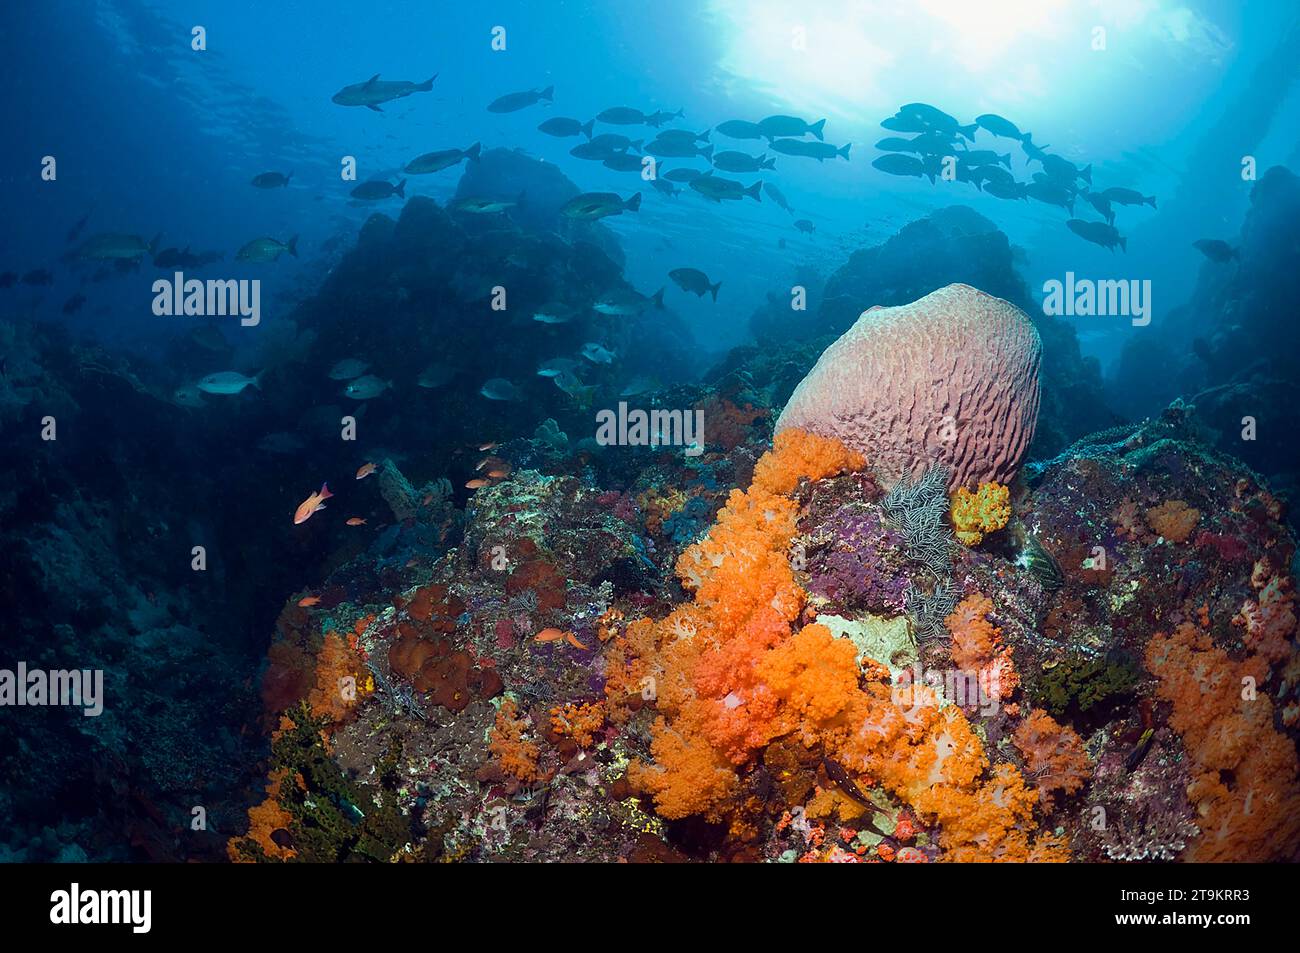 Coral reef scenery with Barrel sponge (Xestospongia sp.), soft coral (Scleronethphya sp.) and a school of snappers in background.  Komodo National Par Stock Photo